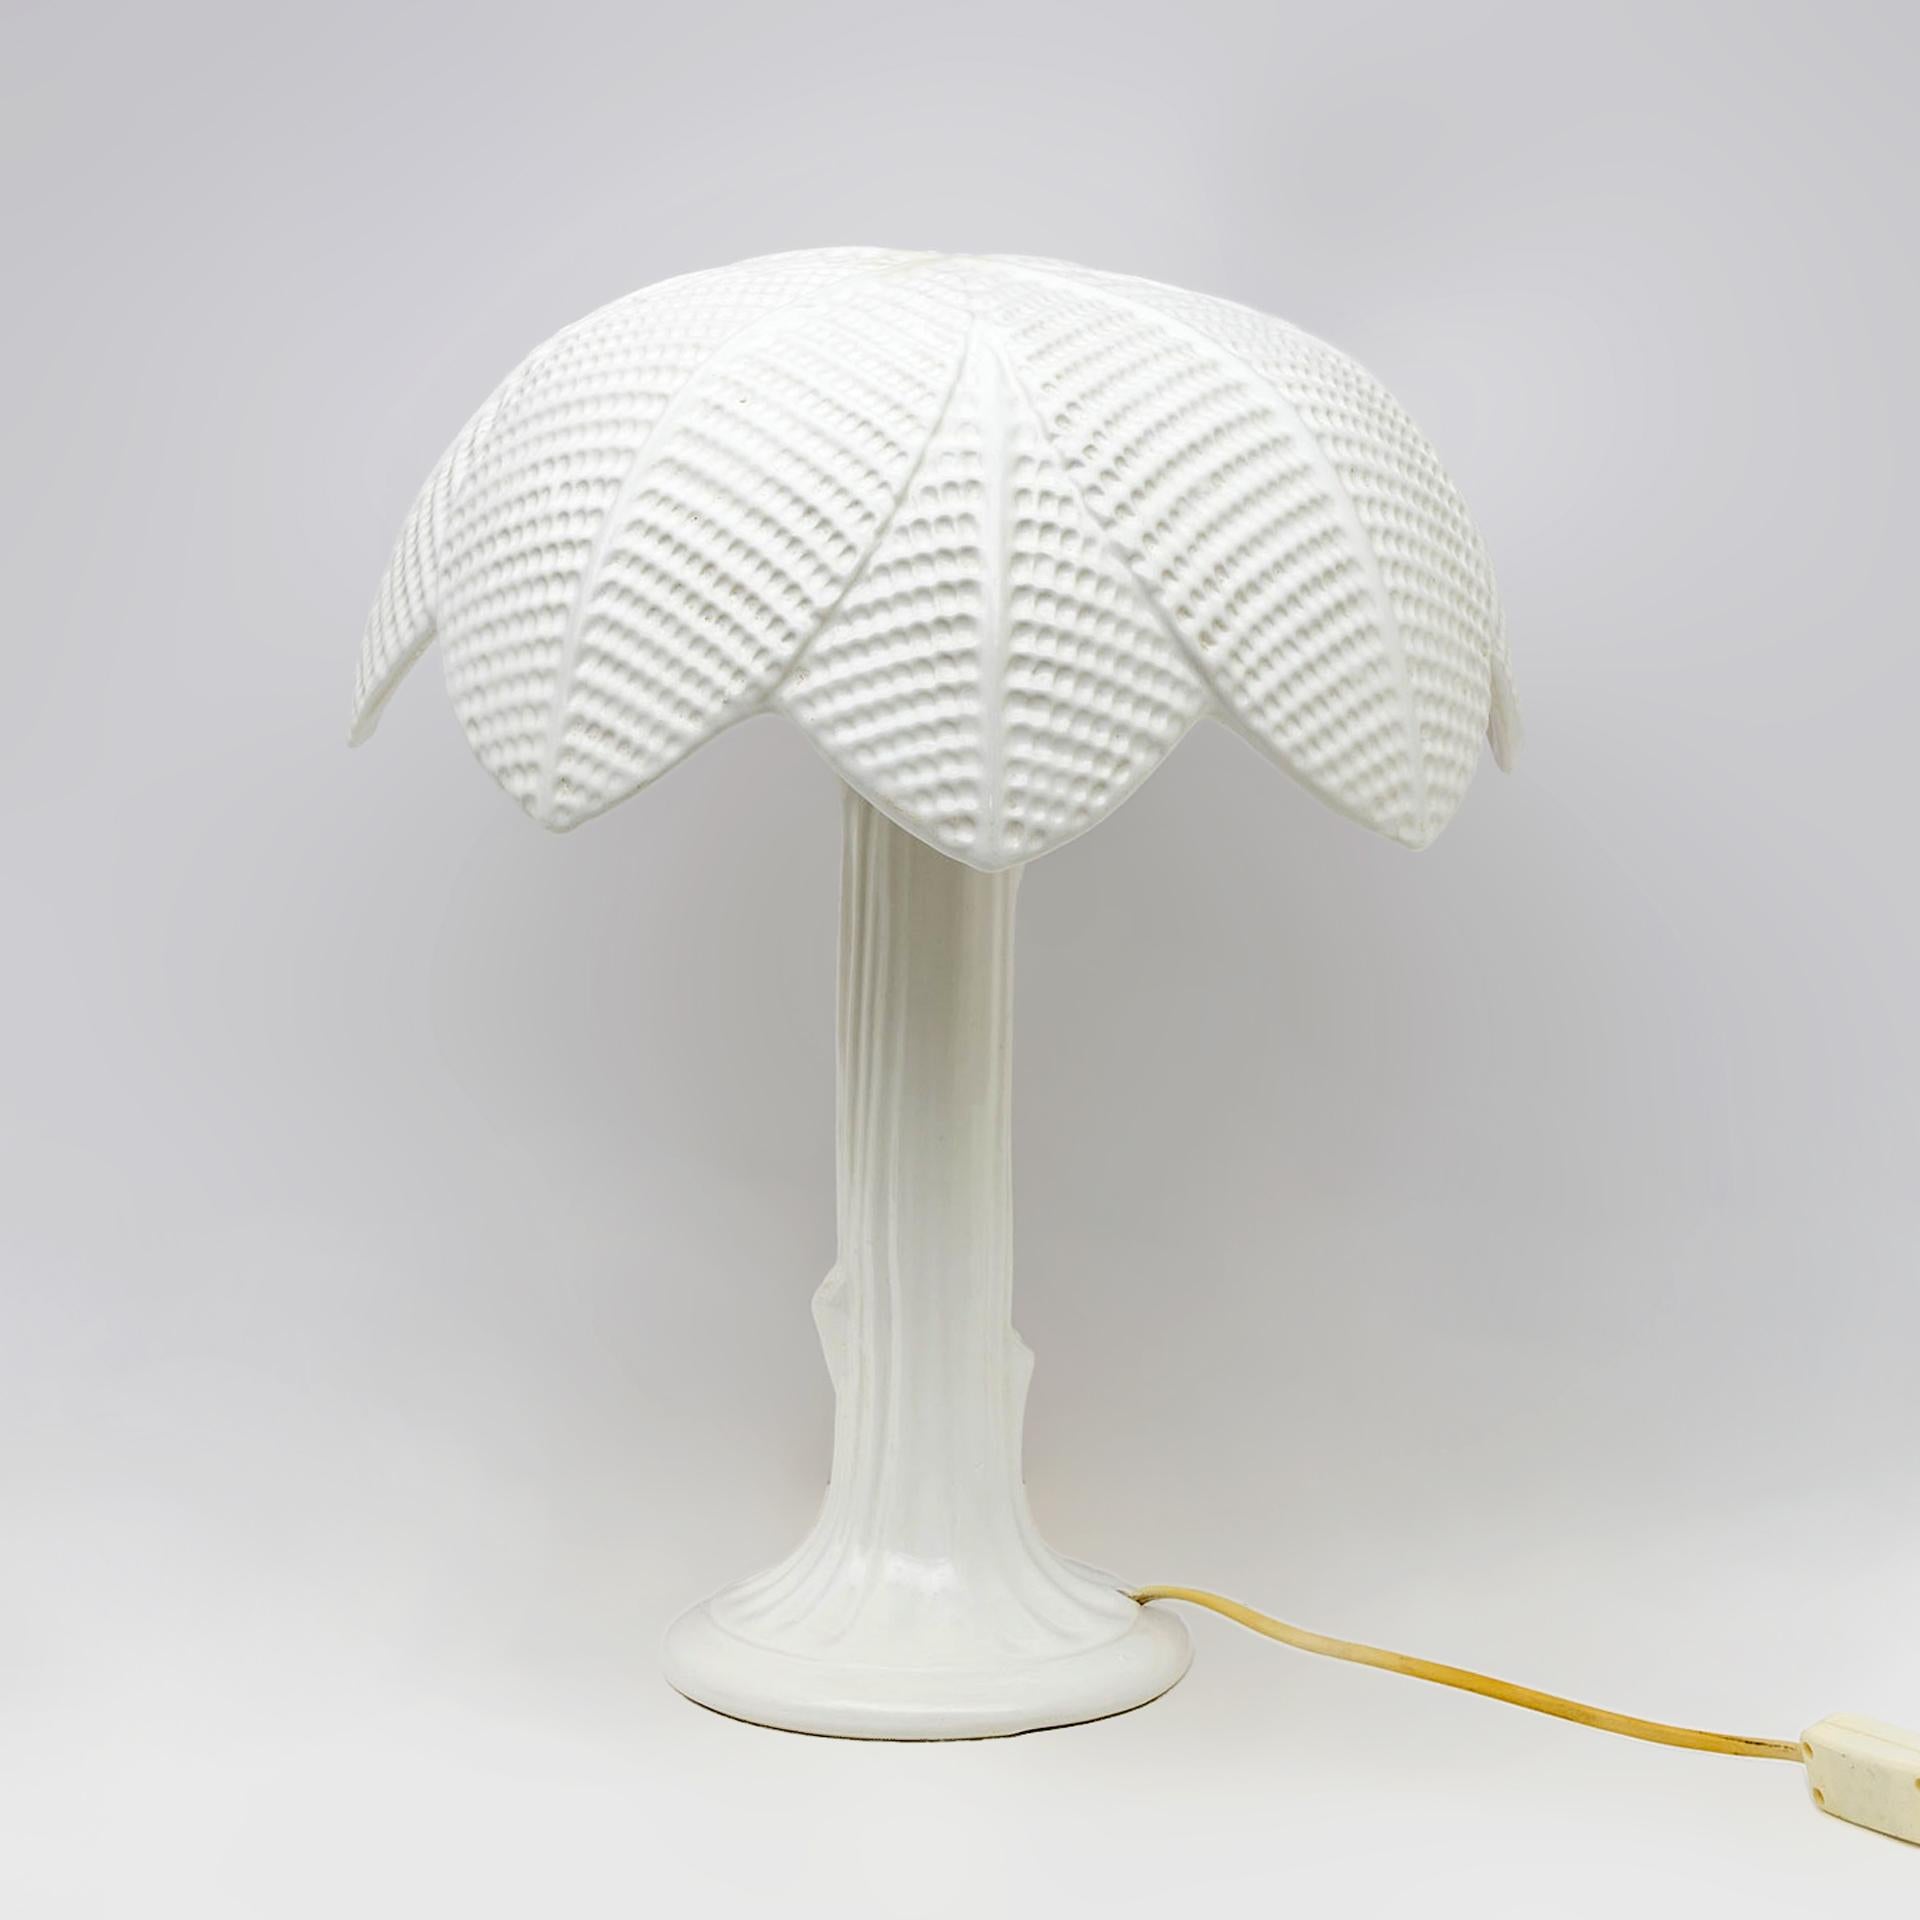 Beautiful 70s designer table lamp Tommaso Barbi for Bizzirri ceramiche.
Made from a single piece of white glazed ceramic in the shape of a palm tree.
There is a small crack as visible in the photos and signs due to age.